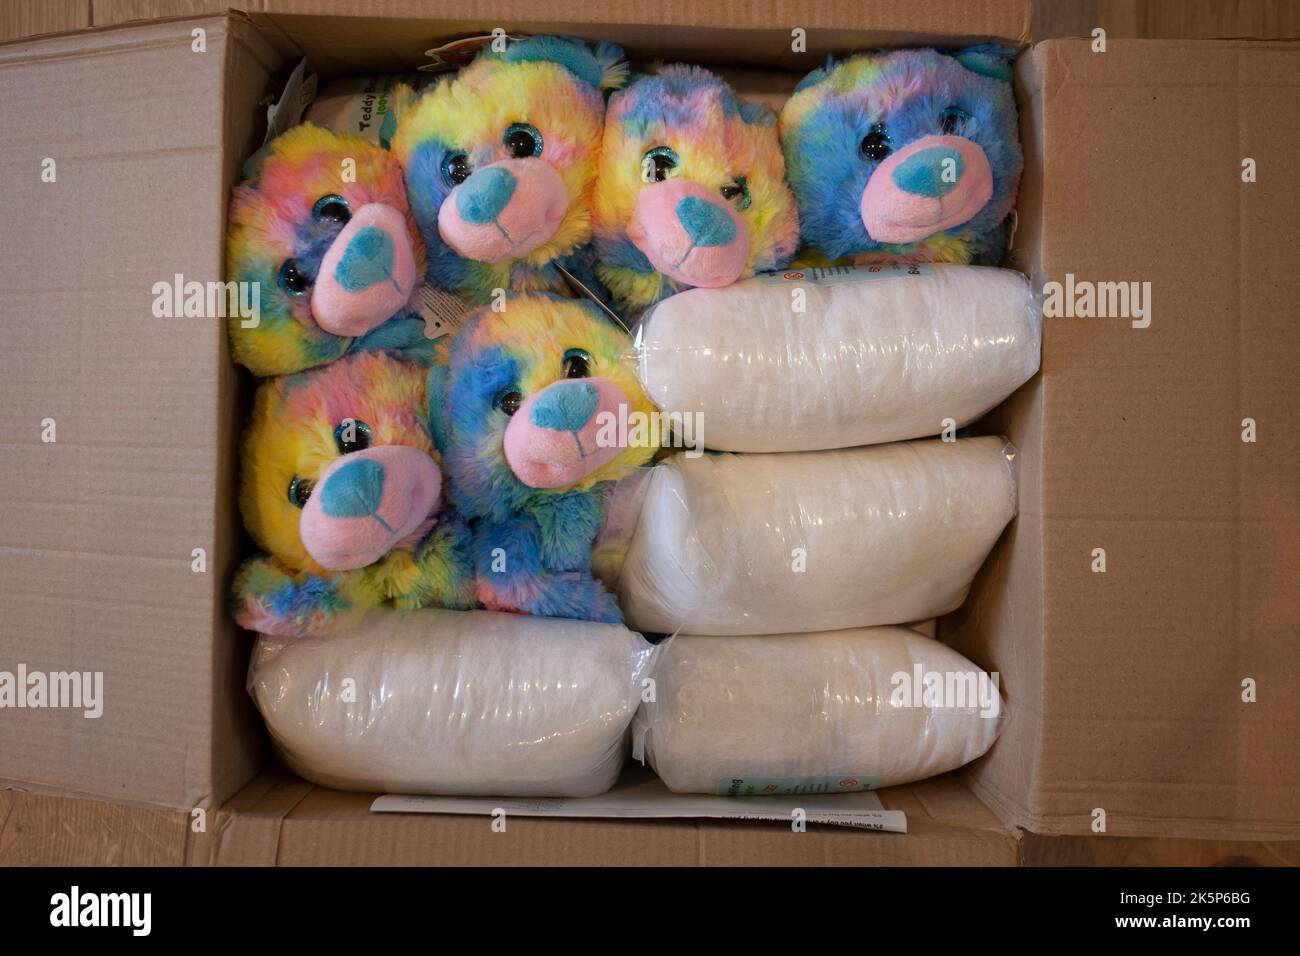 Build your own teddy bear boxed up Stock Photo